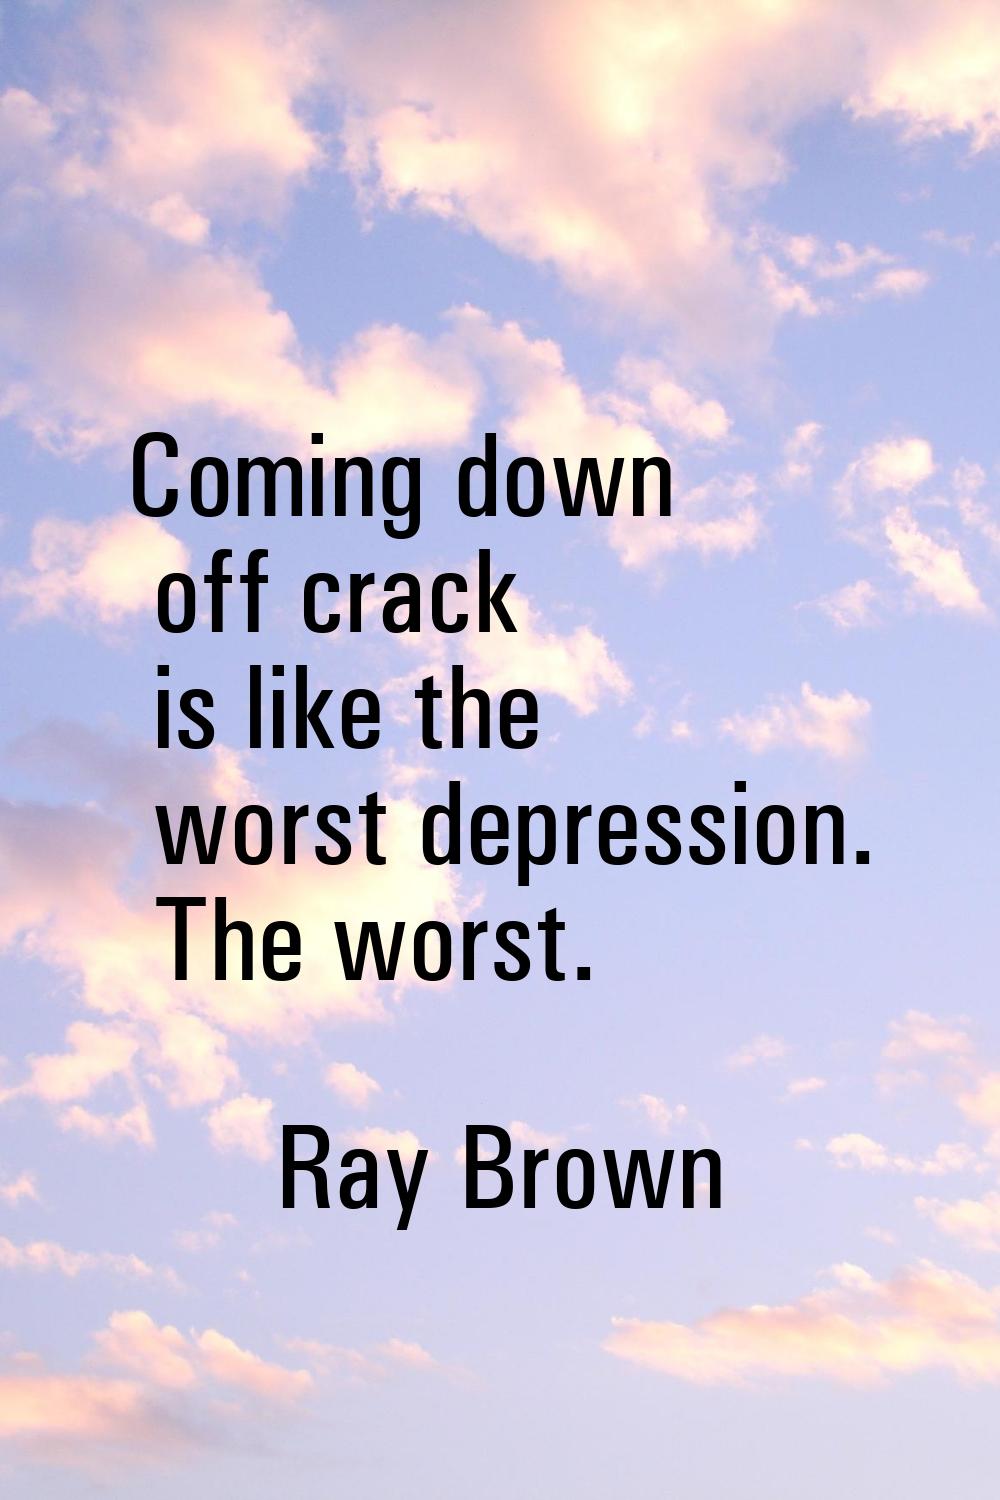 Coming down off crack is like the worst depression. The worst.